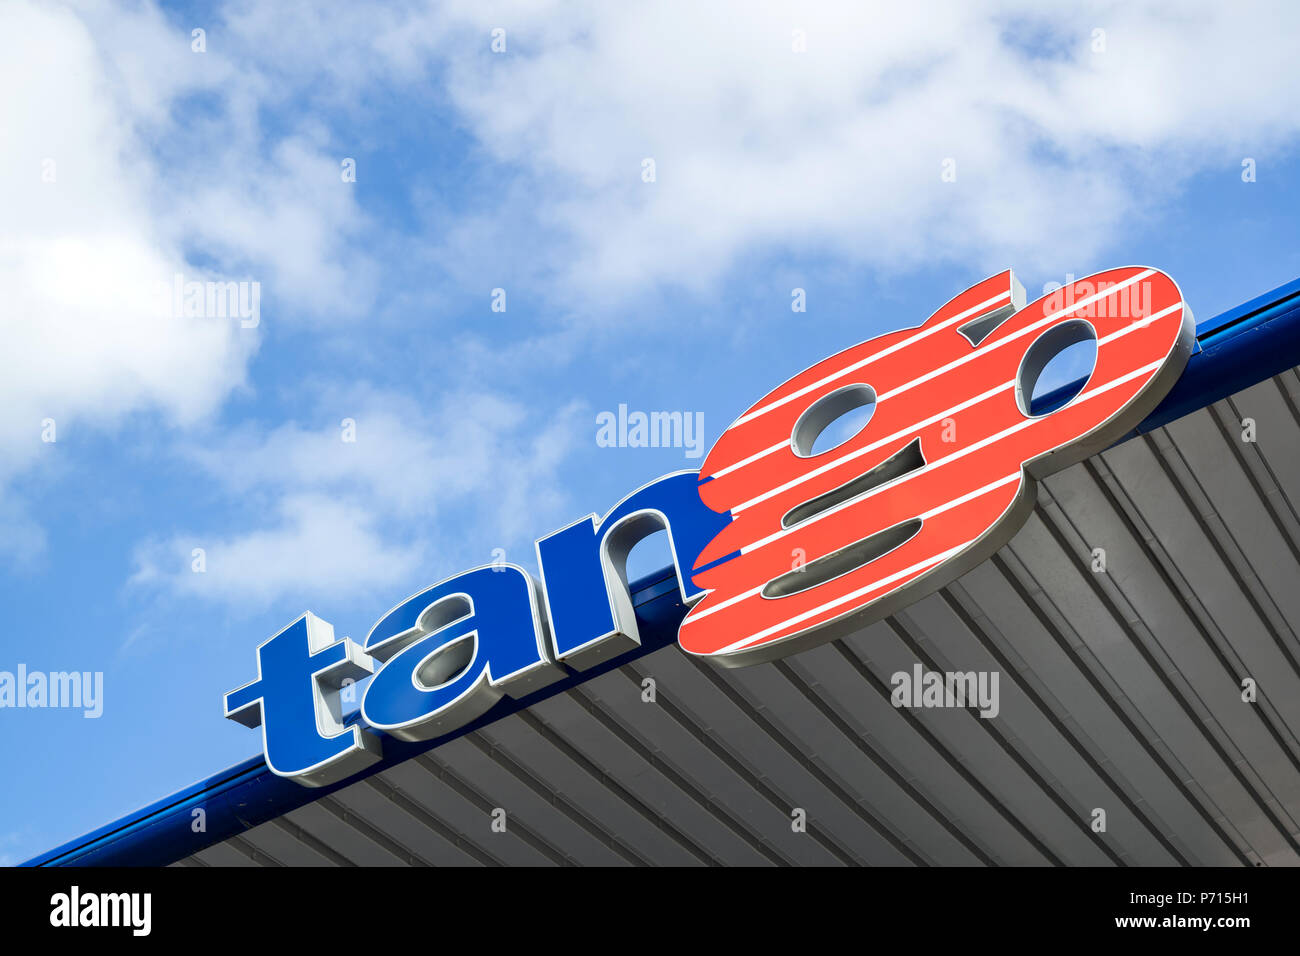 tango sign at gas station. tango operates a network of automatic unmanned stations in the Netherlands and is owned by Kuwait Petroleum. Stock Photo